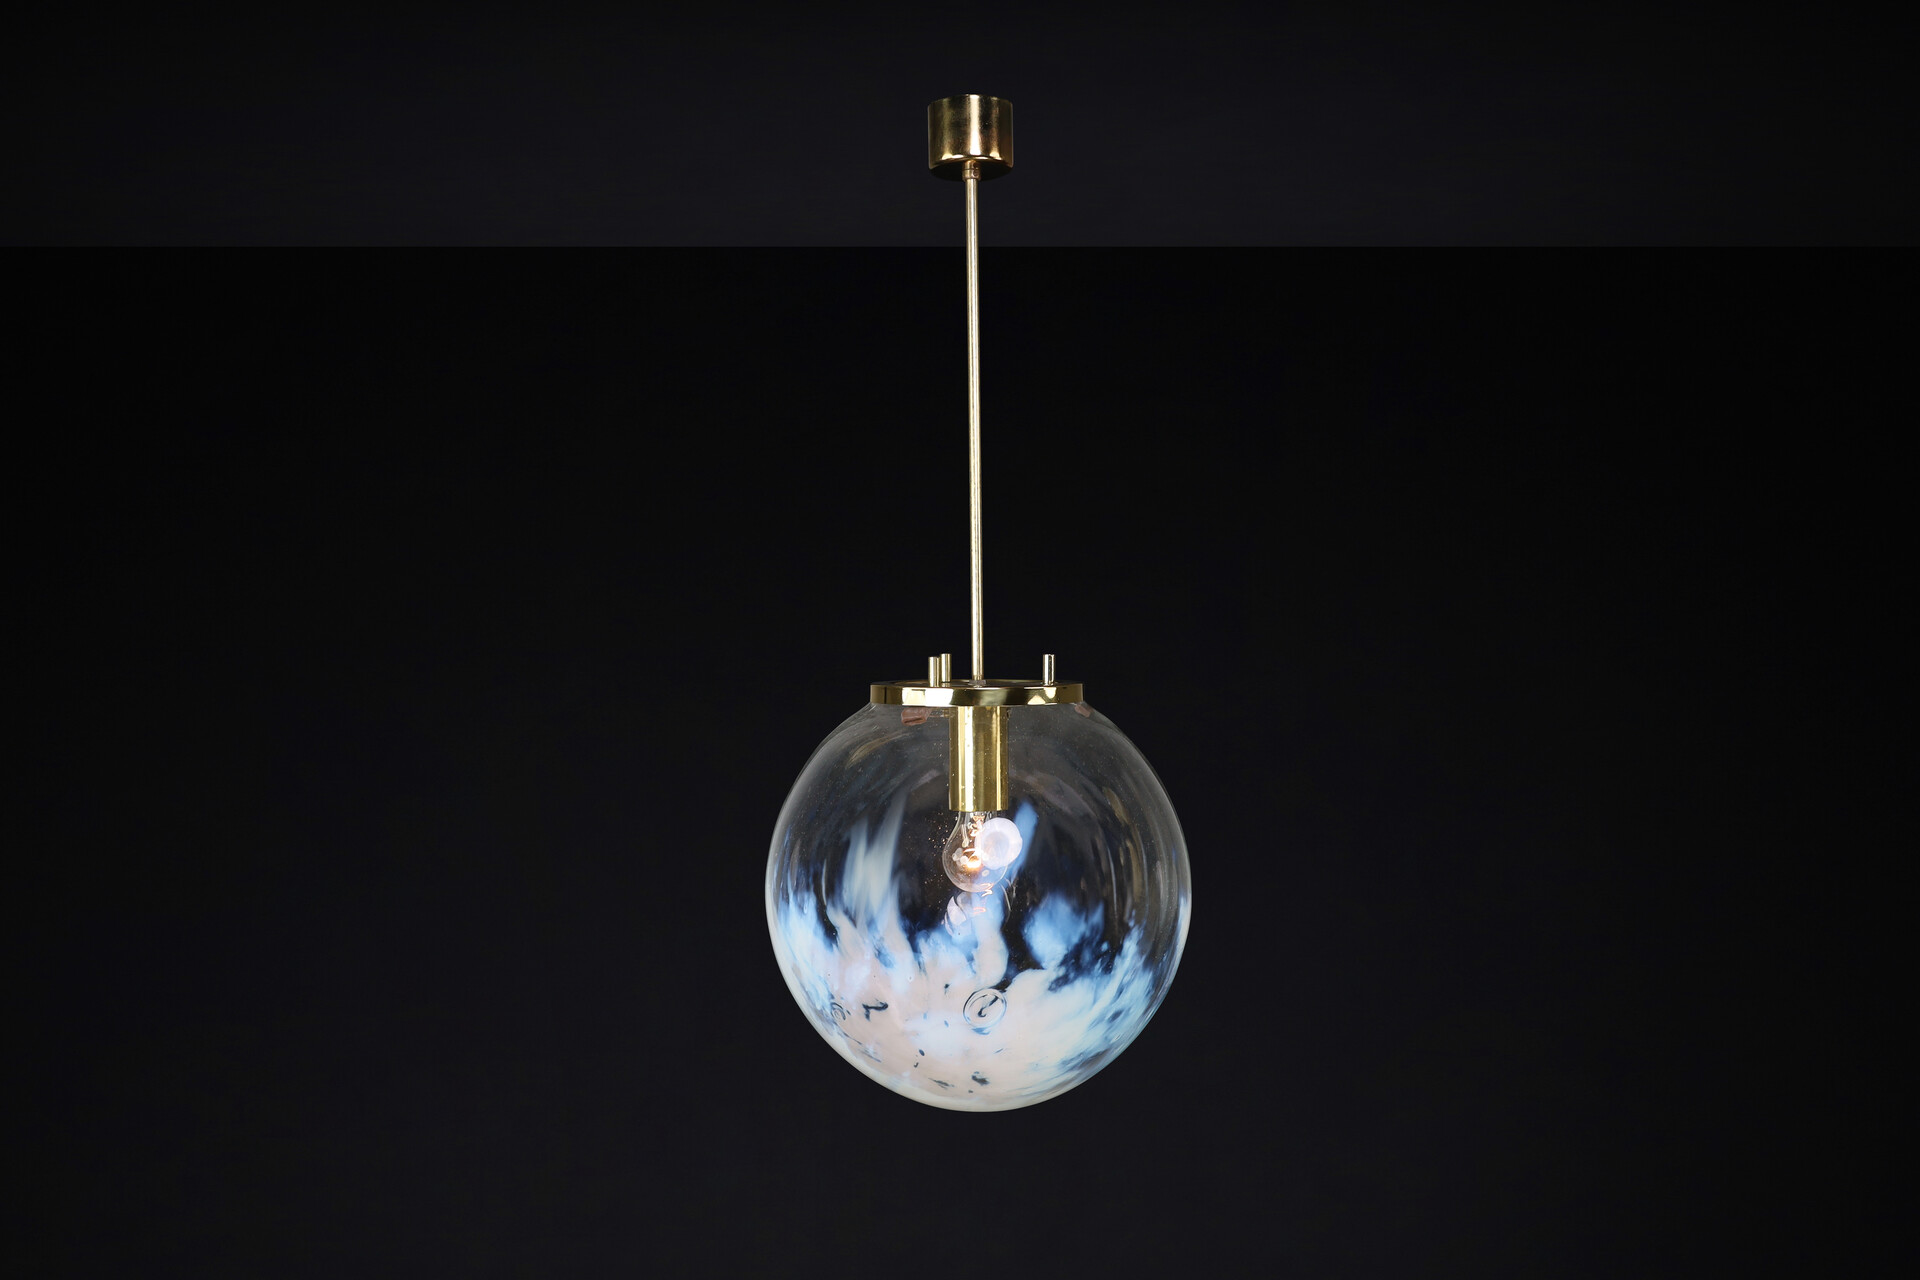 Mid century modern Pendant in Brass and Art-Glass with White Streaks,CZ 1970s Mid-20th century